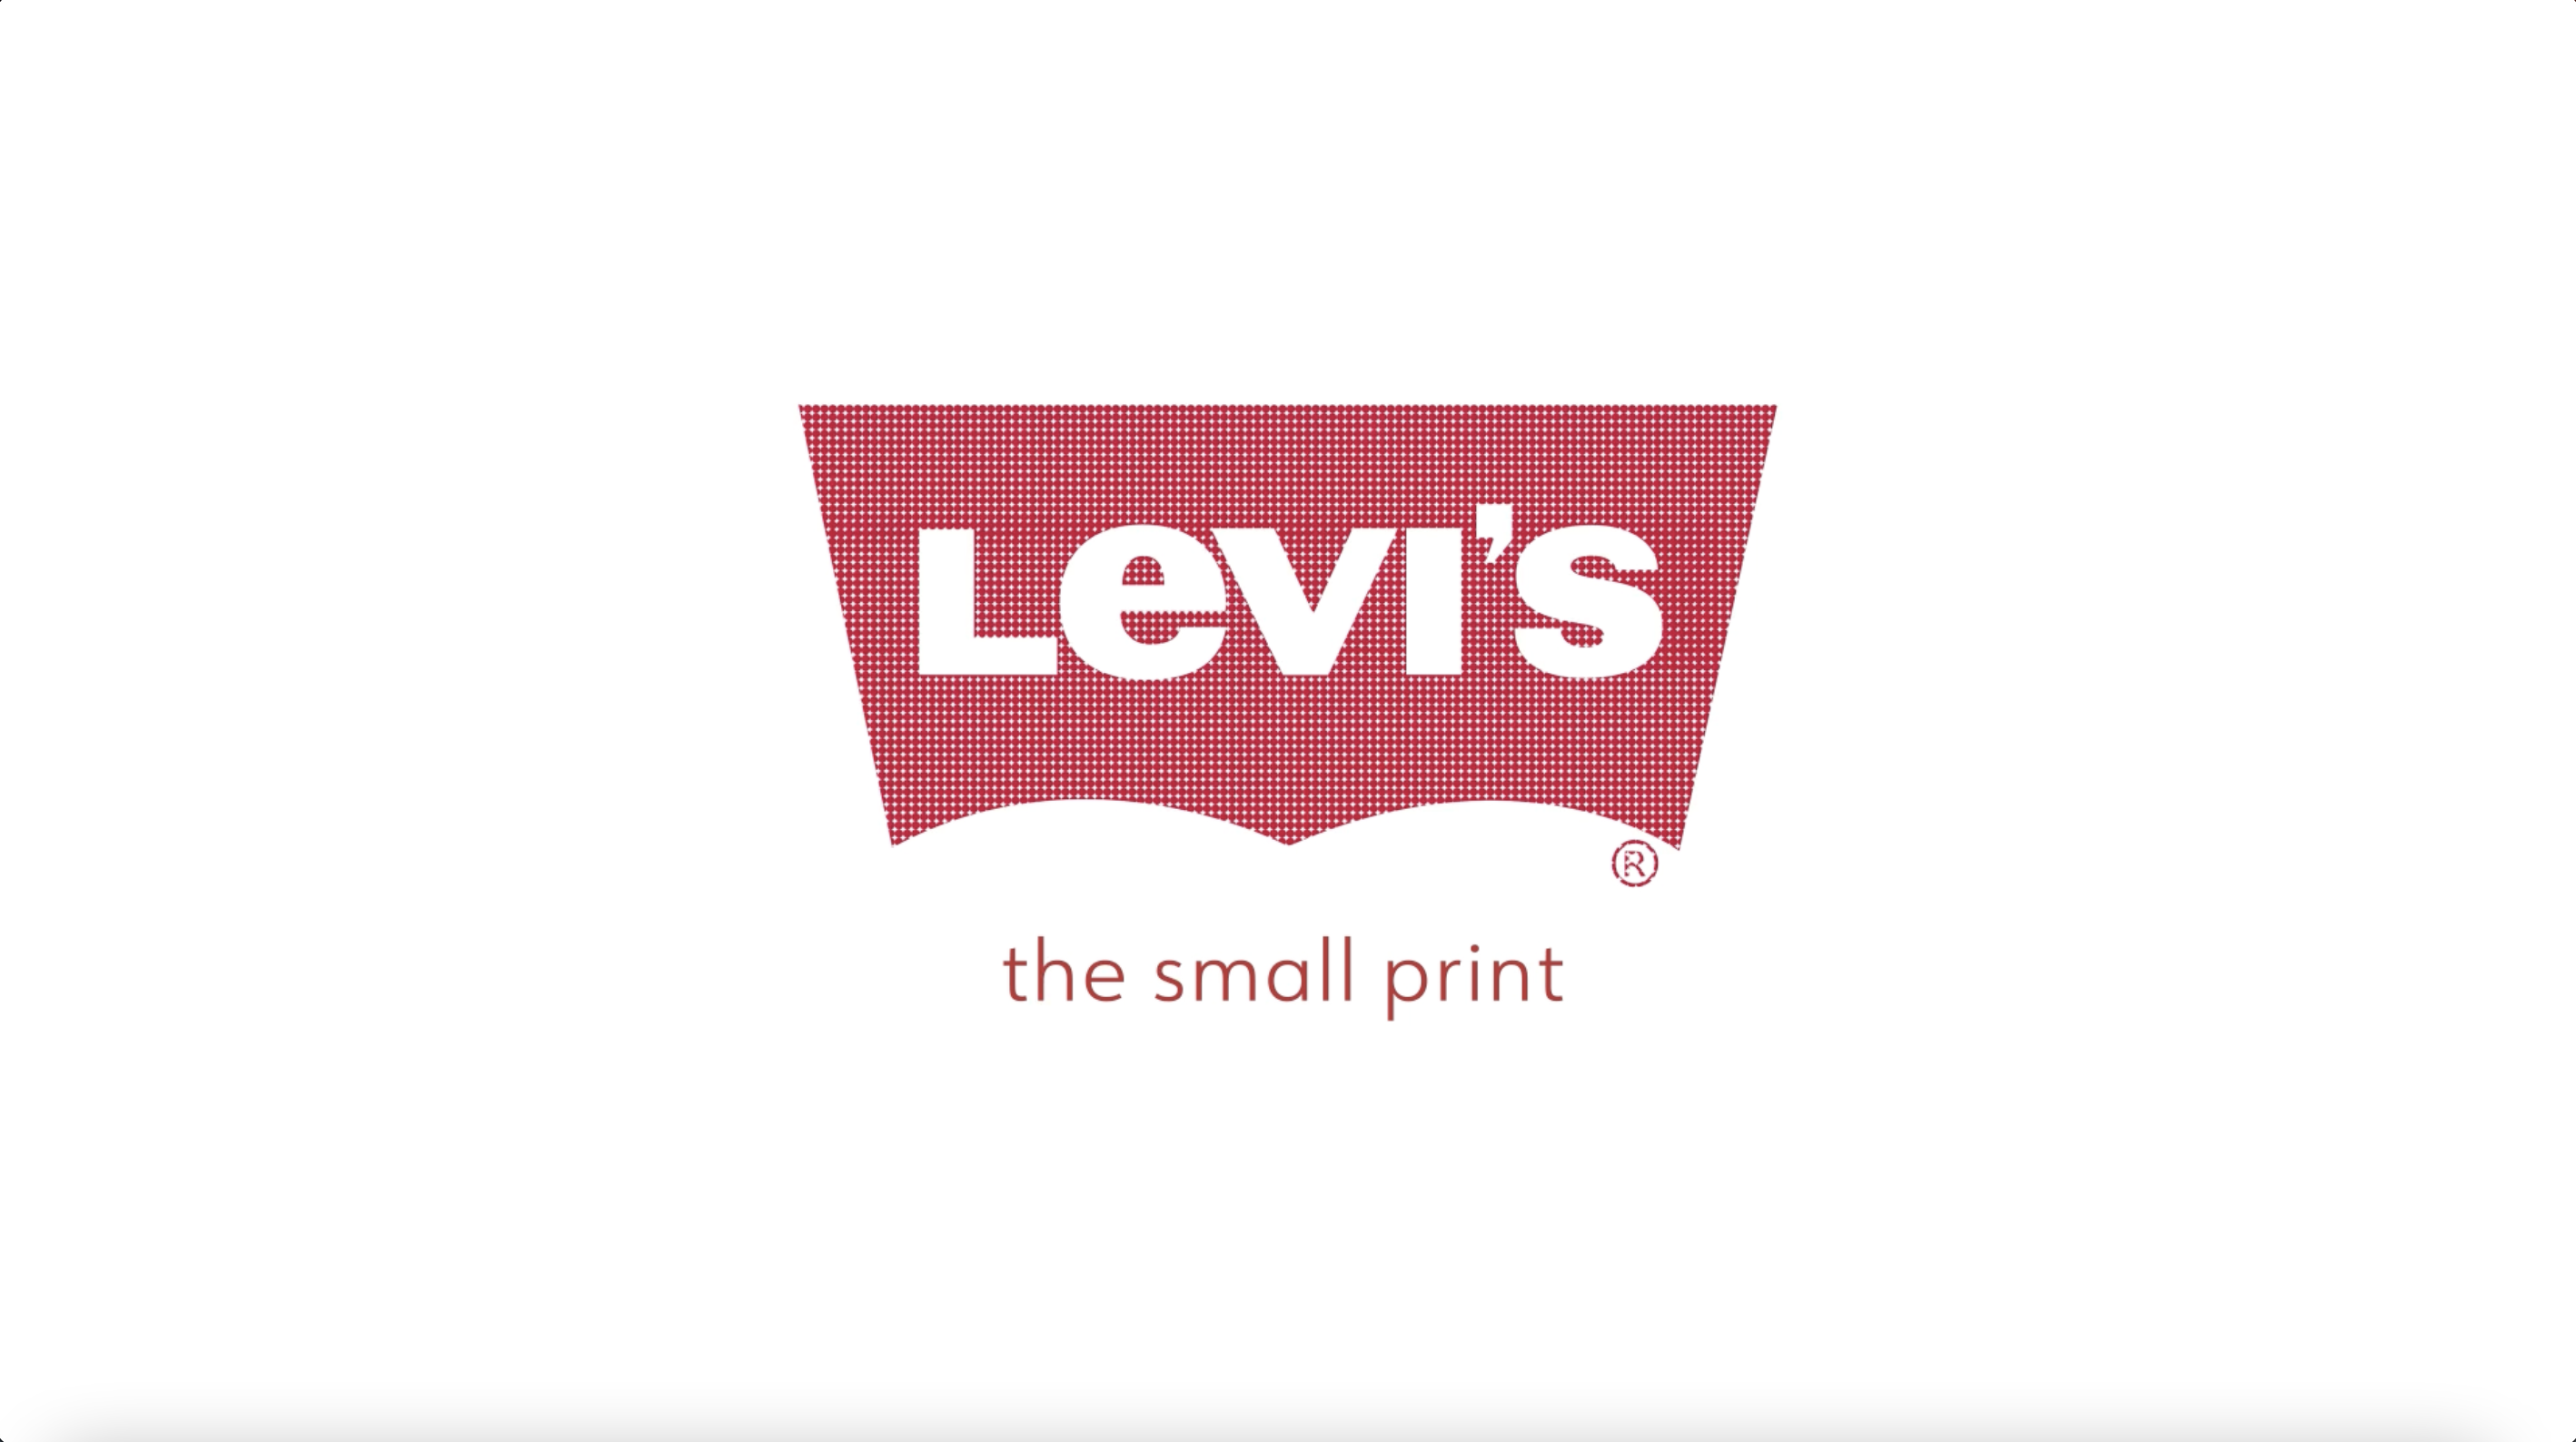 Thumbnail for 'The Small Print' by Nat Dalkiewicz. The Levi's logo on a white background, with 'the small print' written in red sans serif font